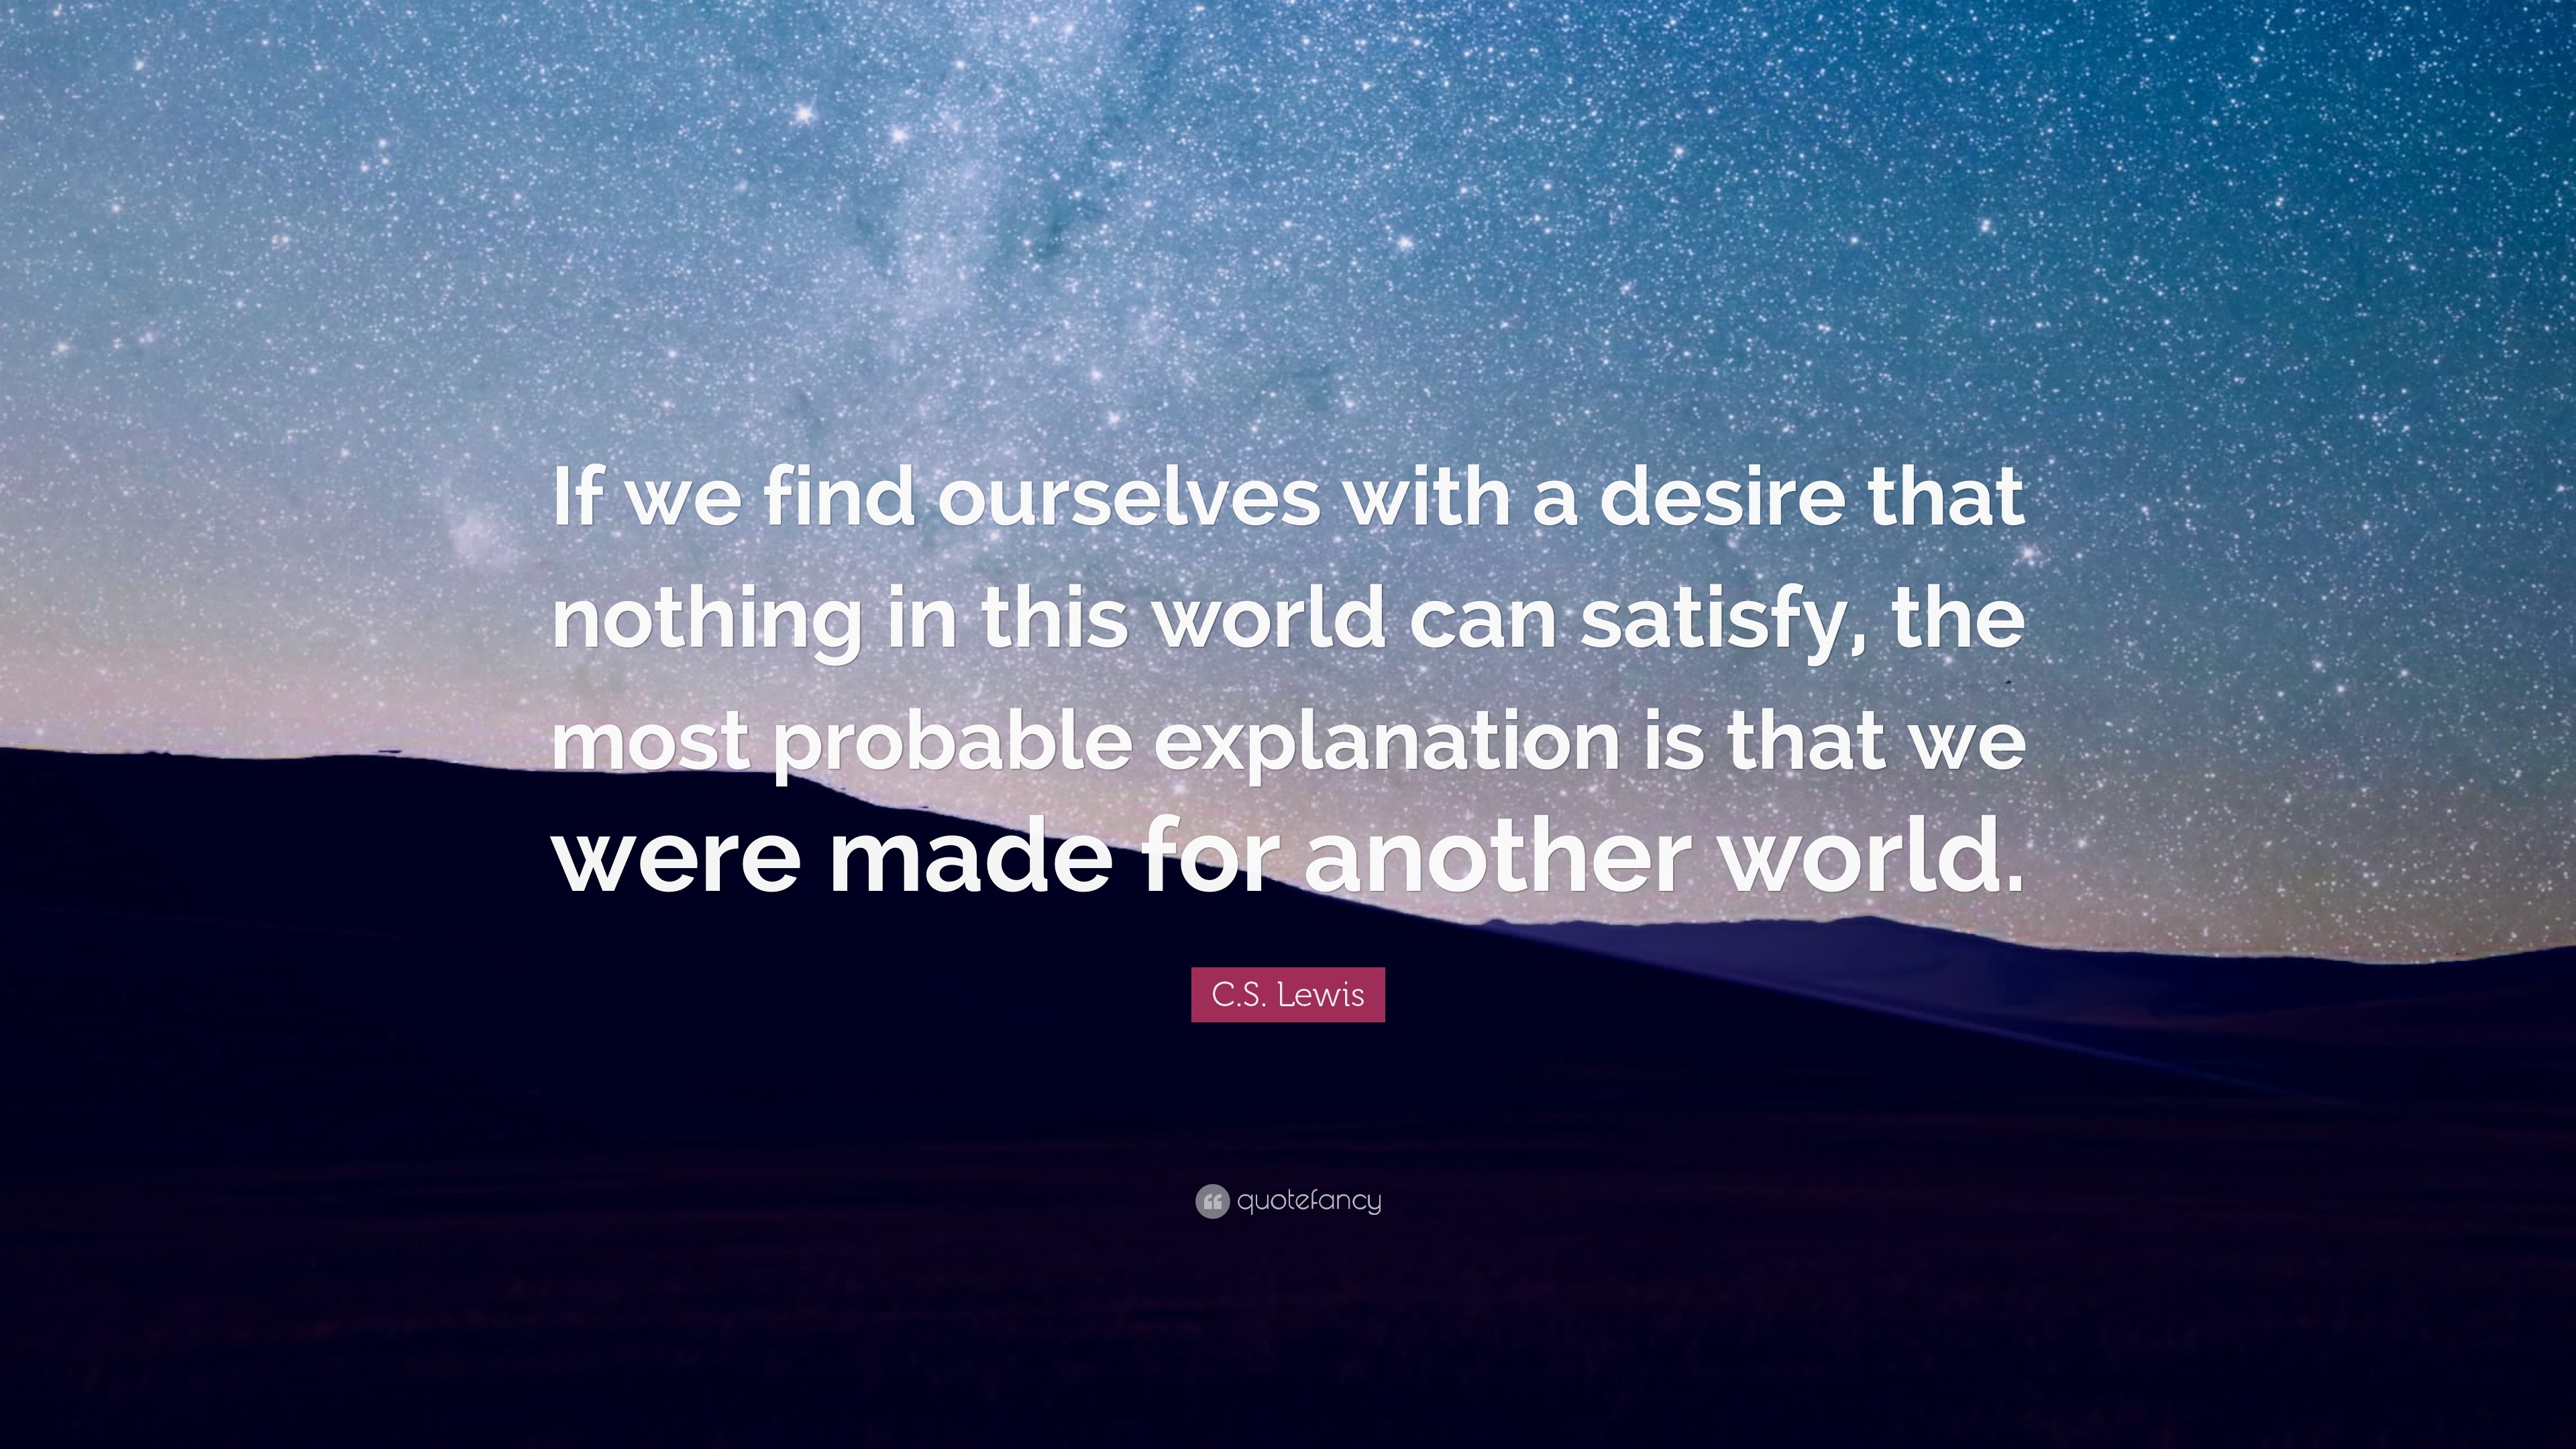 28645-C-S-Lewis-Quote-If-we-find-ourselves-with-a-desire-that-nothing-in.jpg